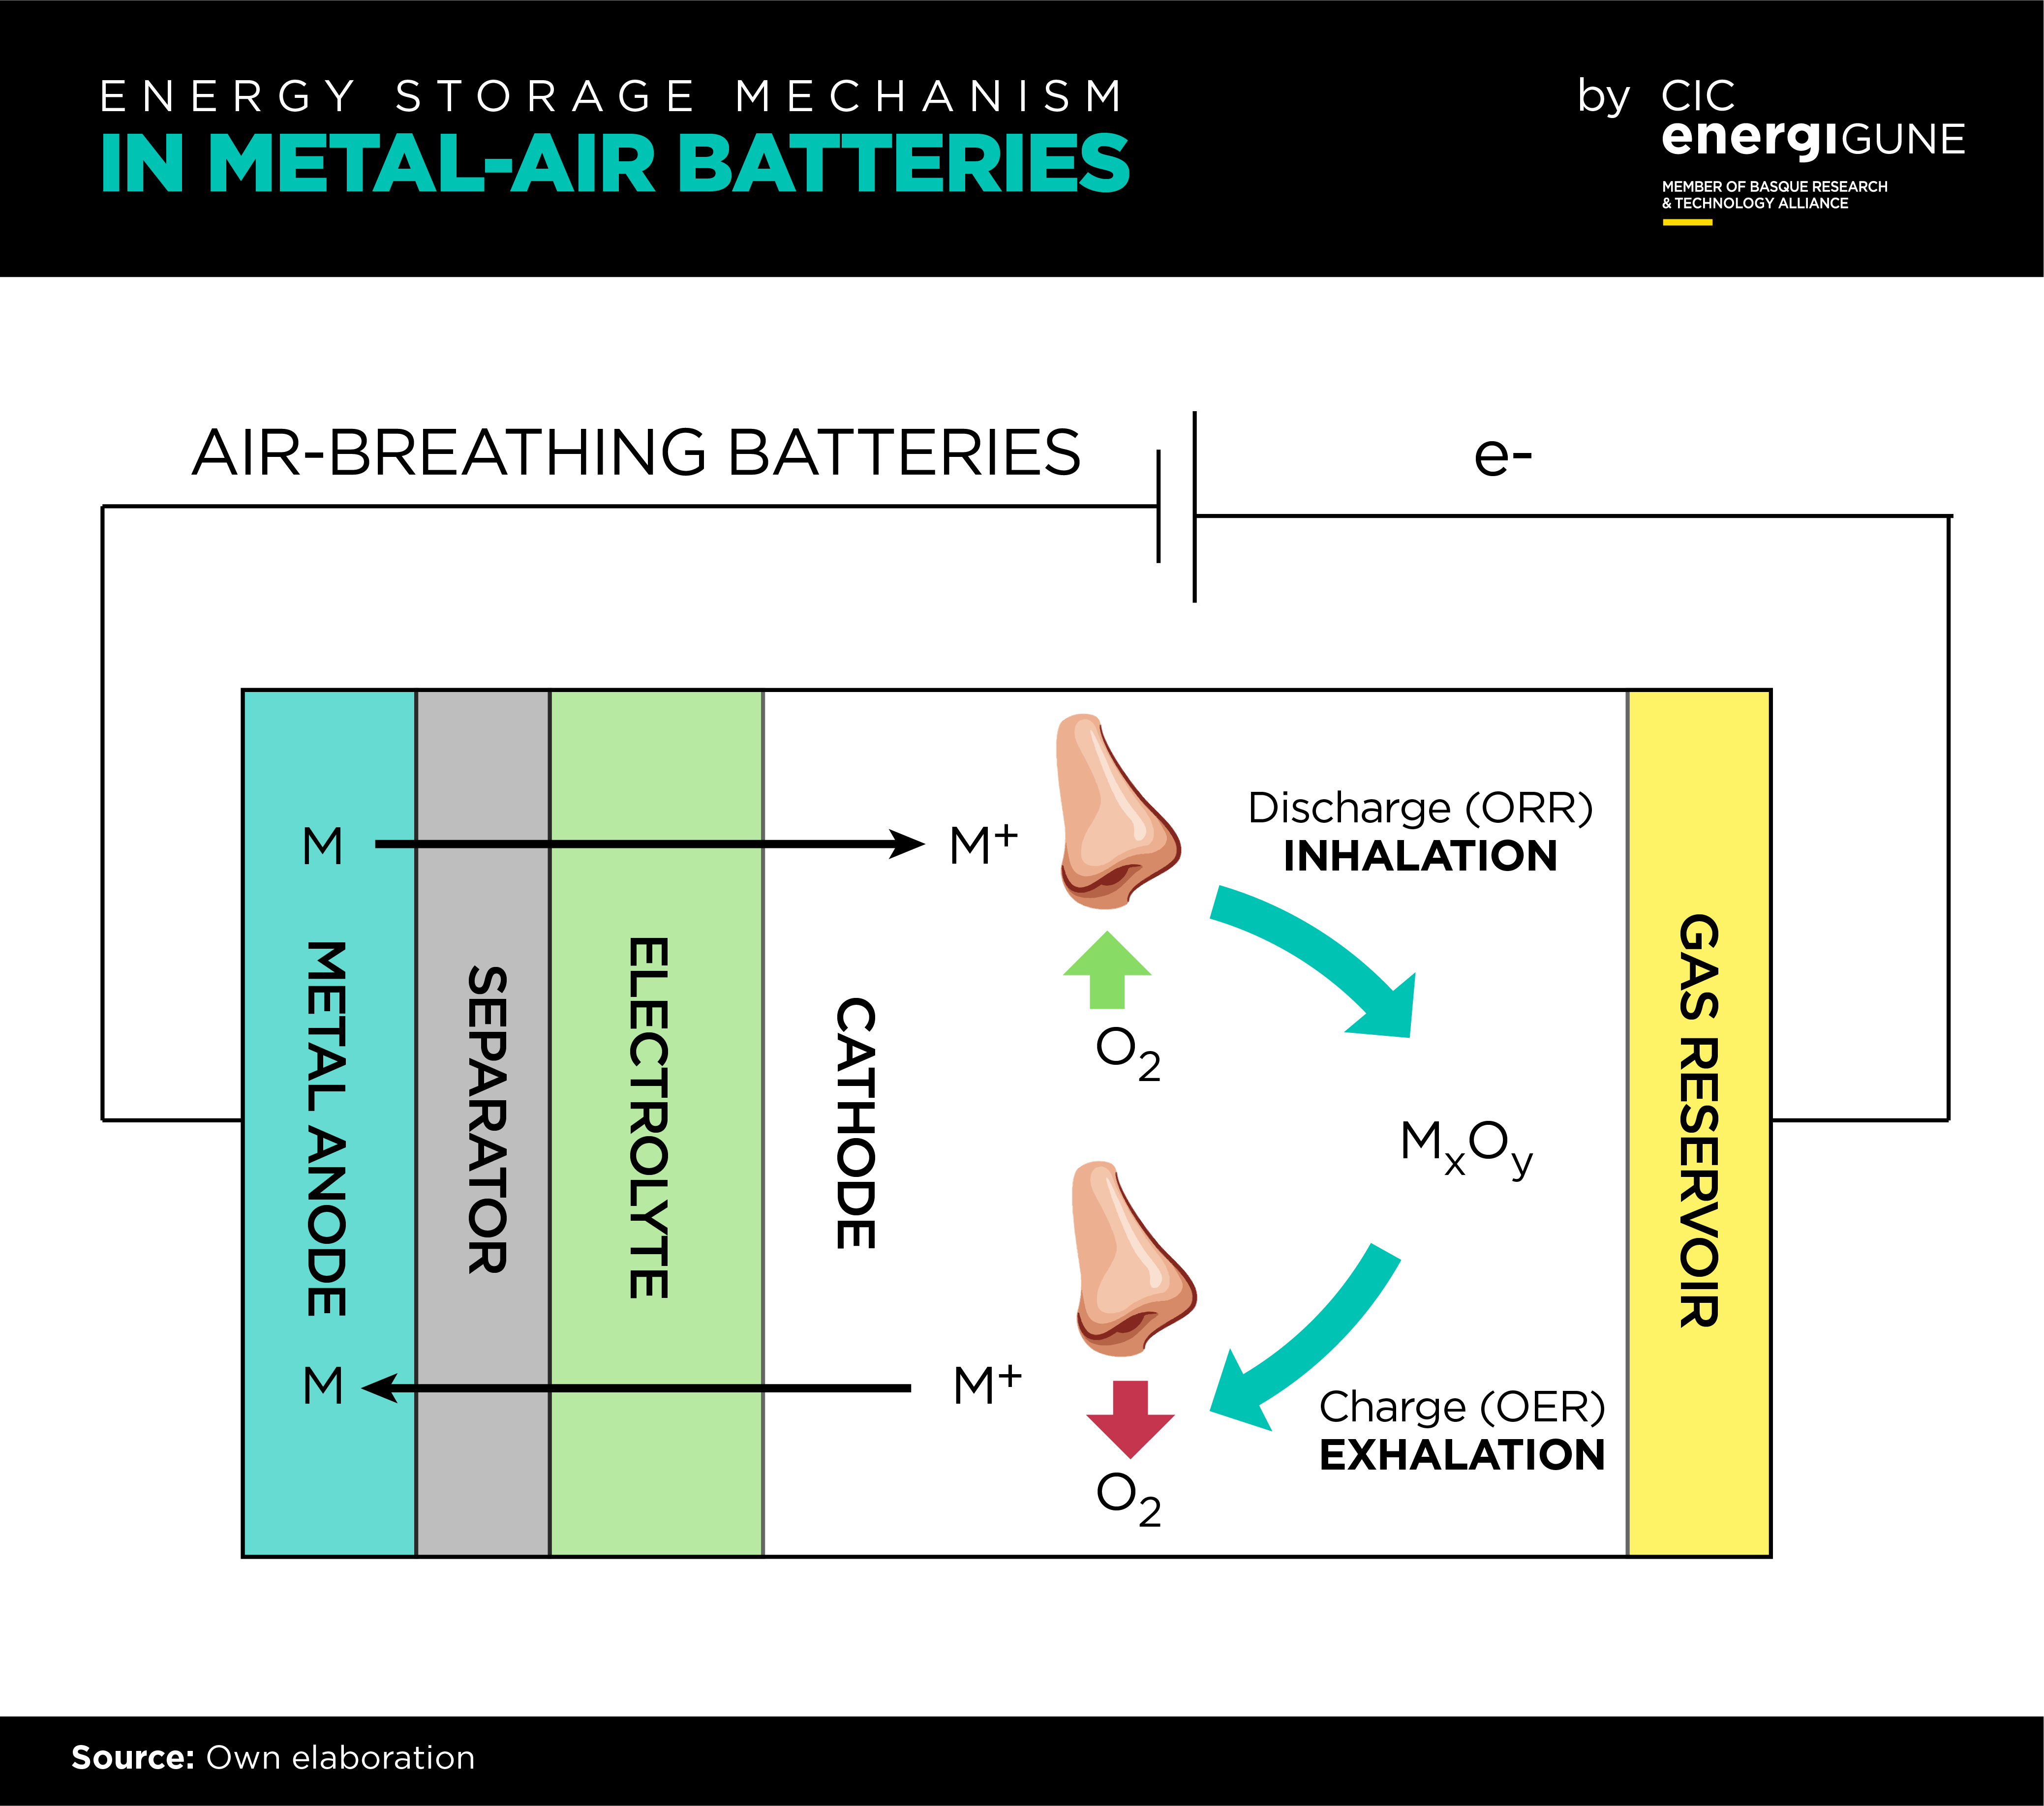 Chart developed by CIC energiGUNE, in which the main similarities between human breathing and metal-air batteries are shown.